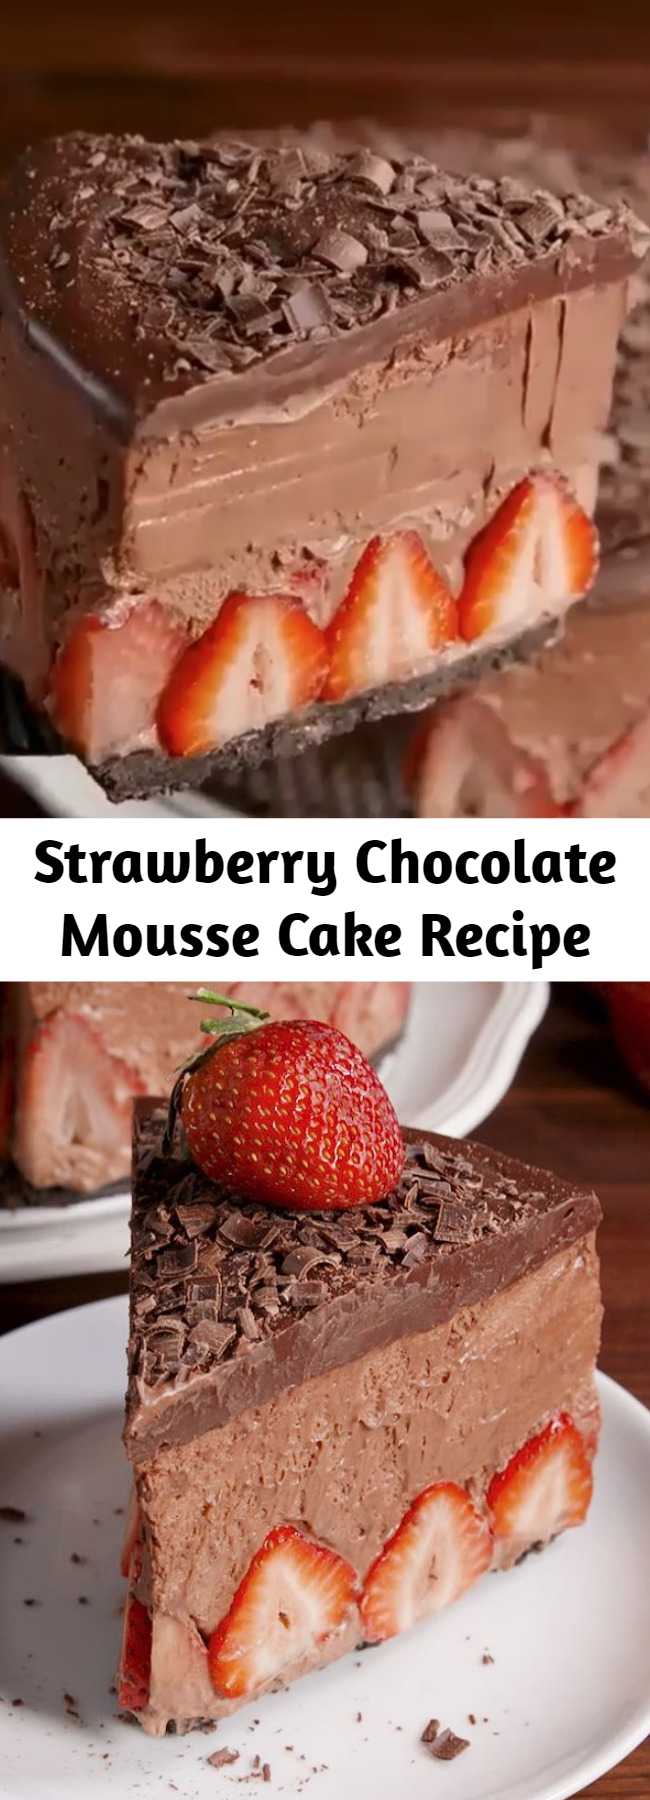 Strawberry Chocolate Mousse Cake Recipe - Get ready for the most decadent cake of your life. #food #easyrecipe #baking #dessert #cake